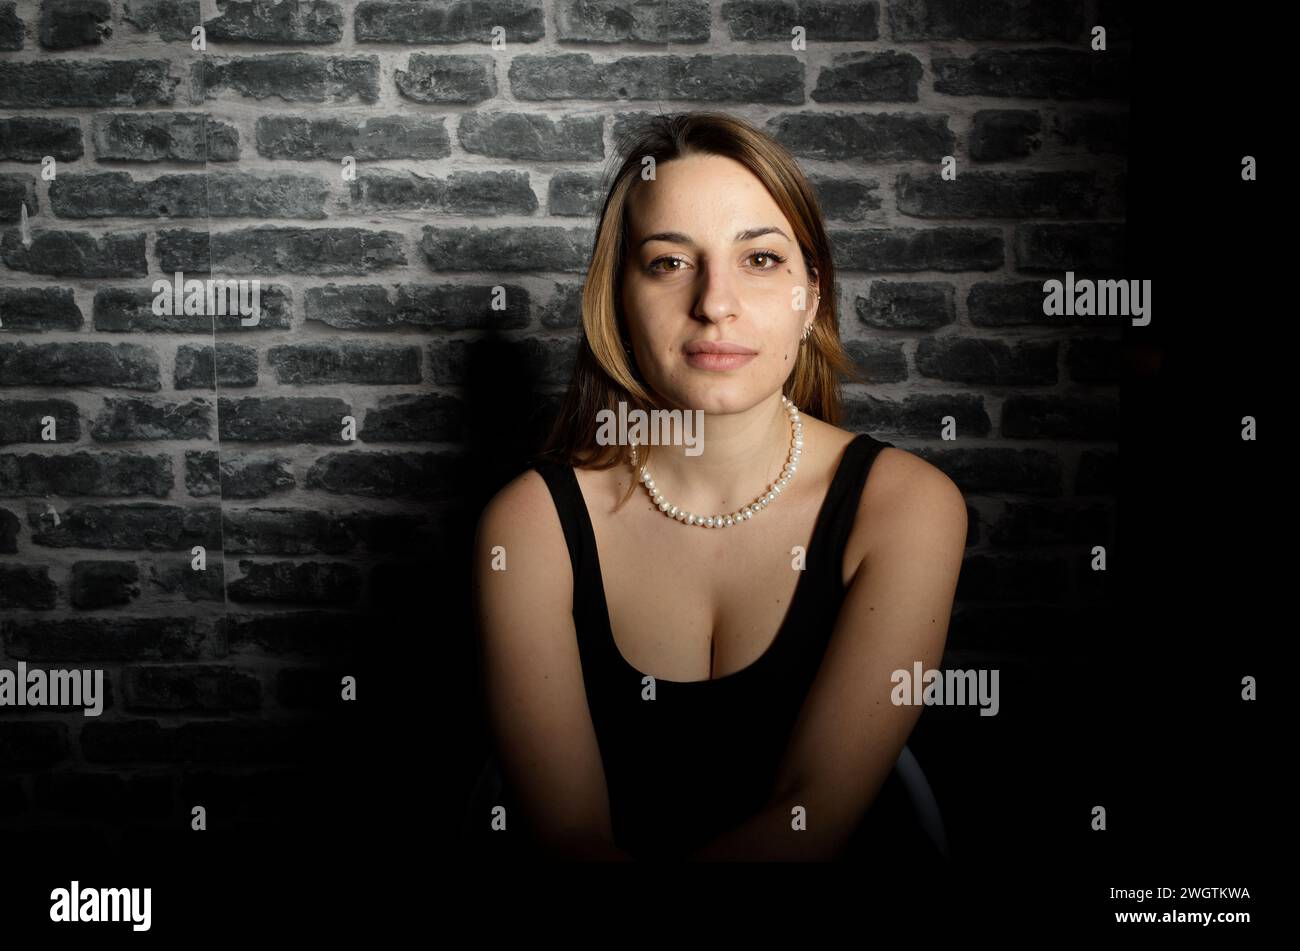 Young woman indoors, Milano, Italy. Stock Photo